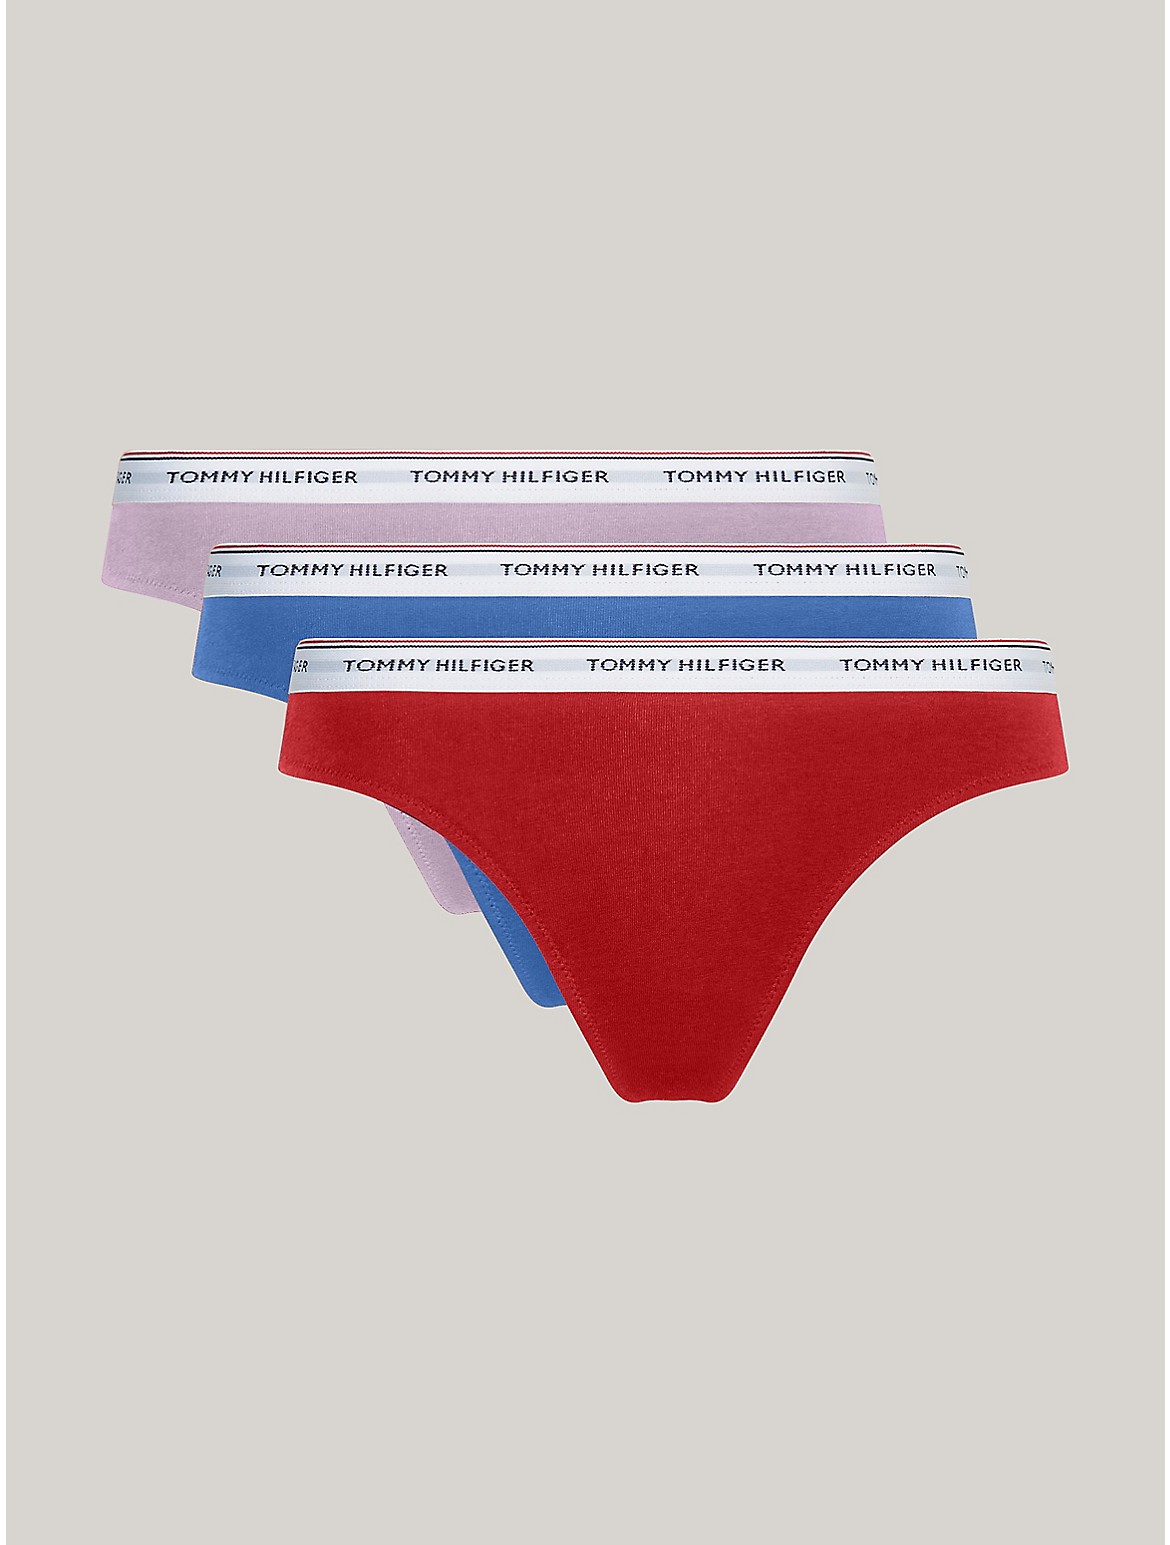 Panties Tommy Hilfiger Lace 3 Pack Bikini Desert Sky/ White/ Primary Red